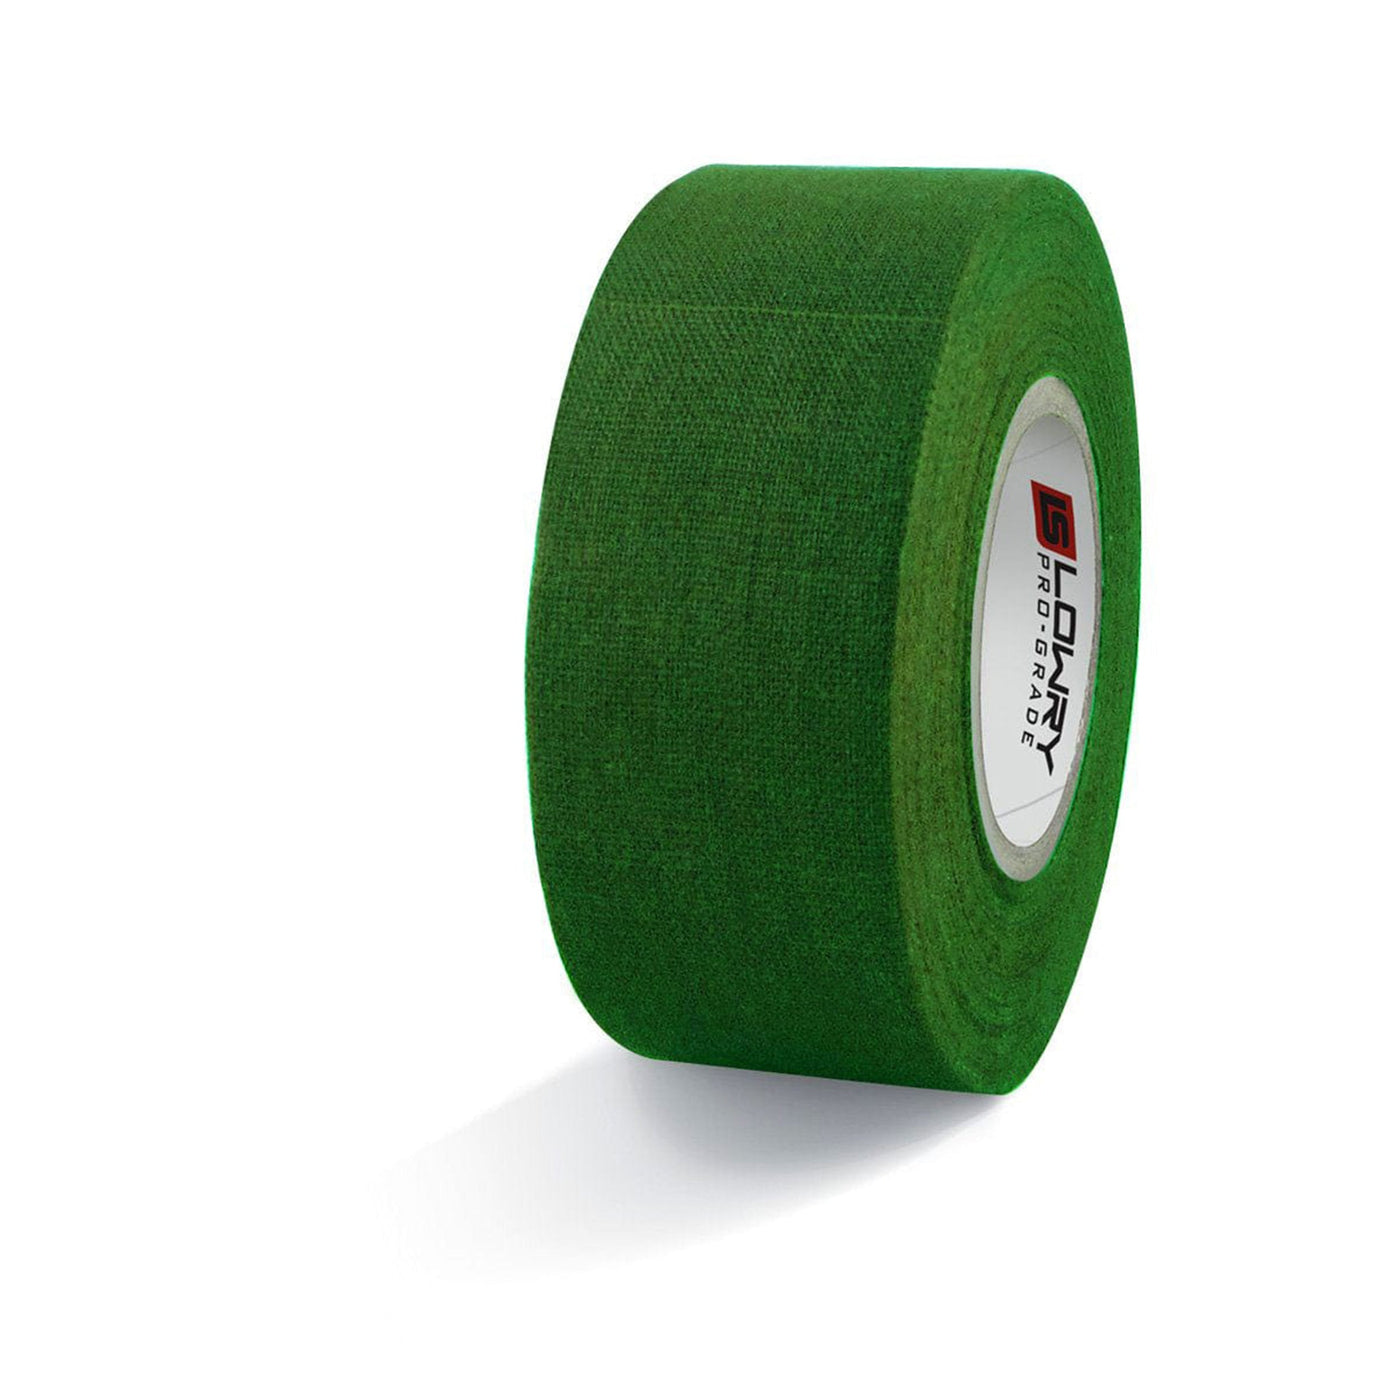 Lowry Sports Pro-Grade Colored Hockey Stick Tape - The Hockey Shop Source For Sports